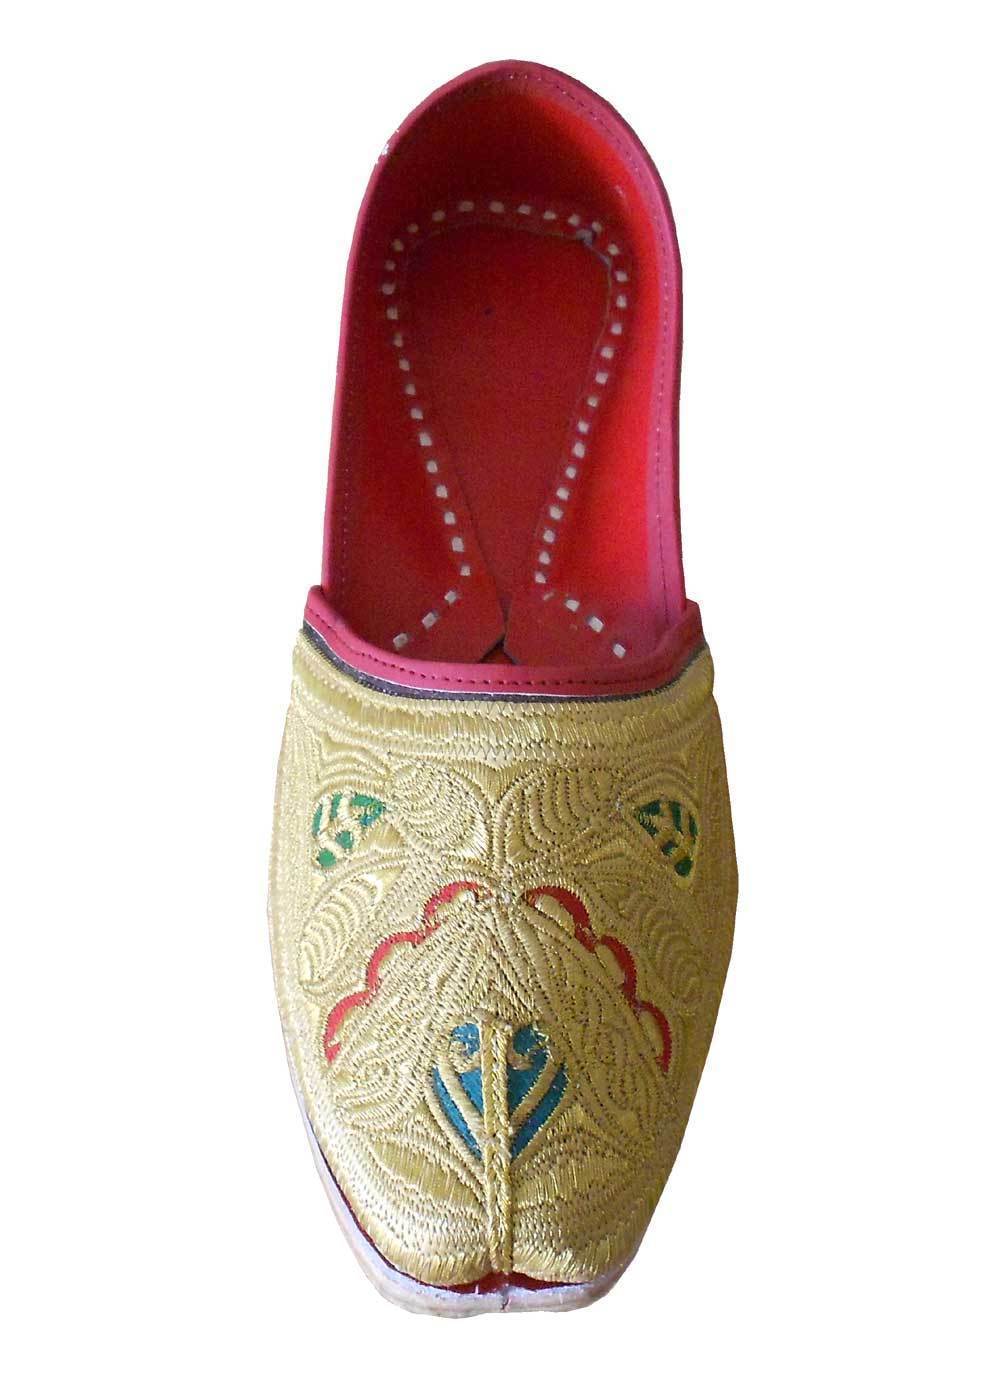 Men Shoes Indian Handmade Jutti Gold Leather Espadrilles Embroidered ...